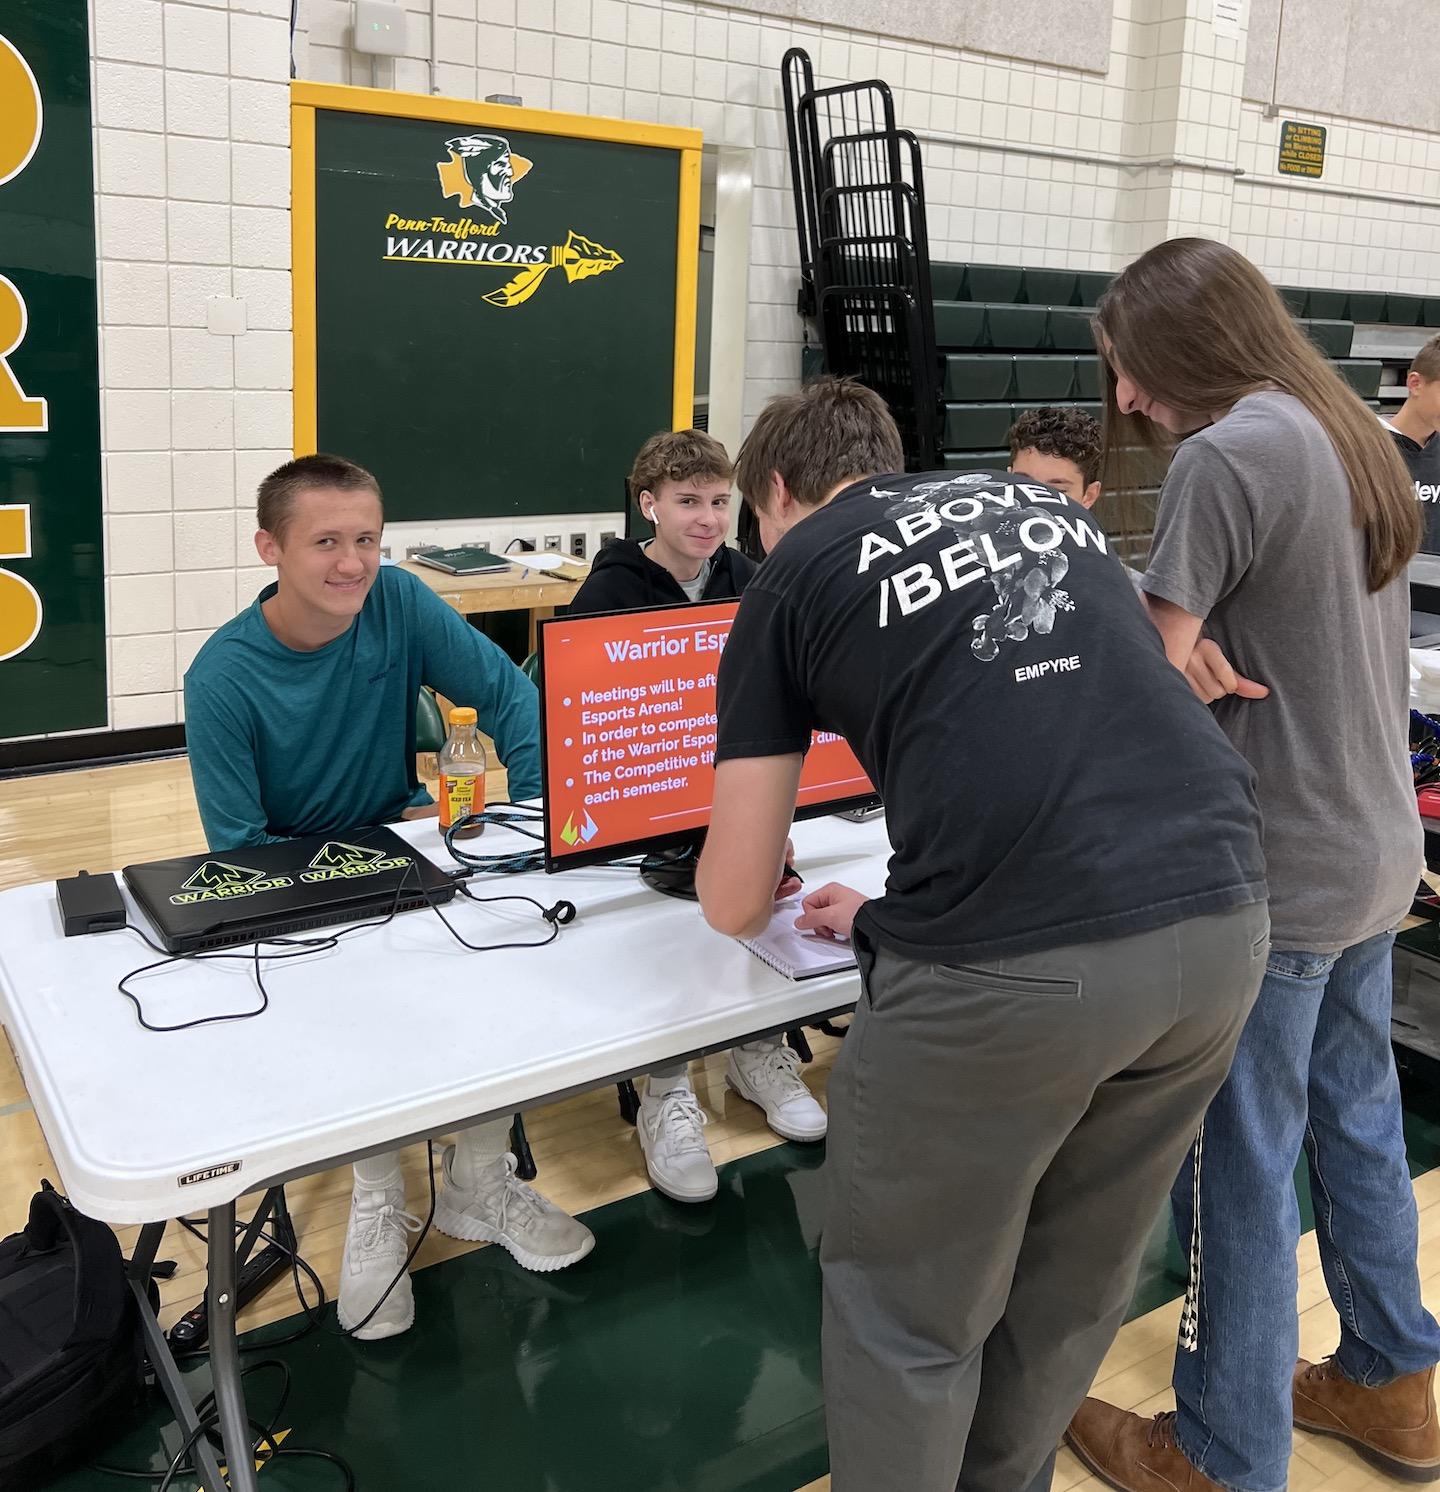 The E-Sport table, manned by Landon Orloski and Ben Petrillo garnered a lot of interest